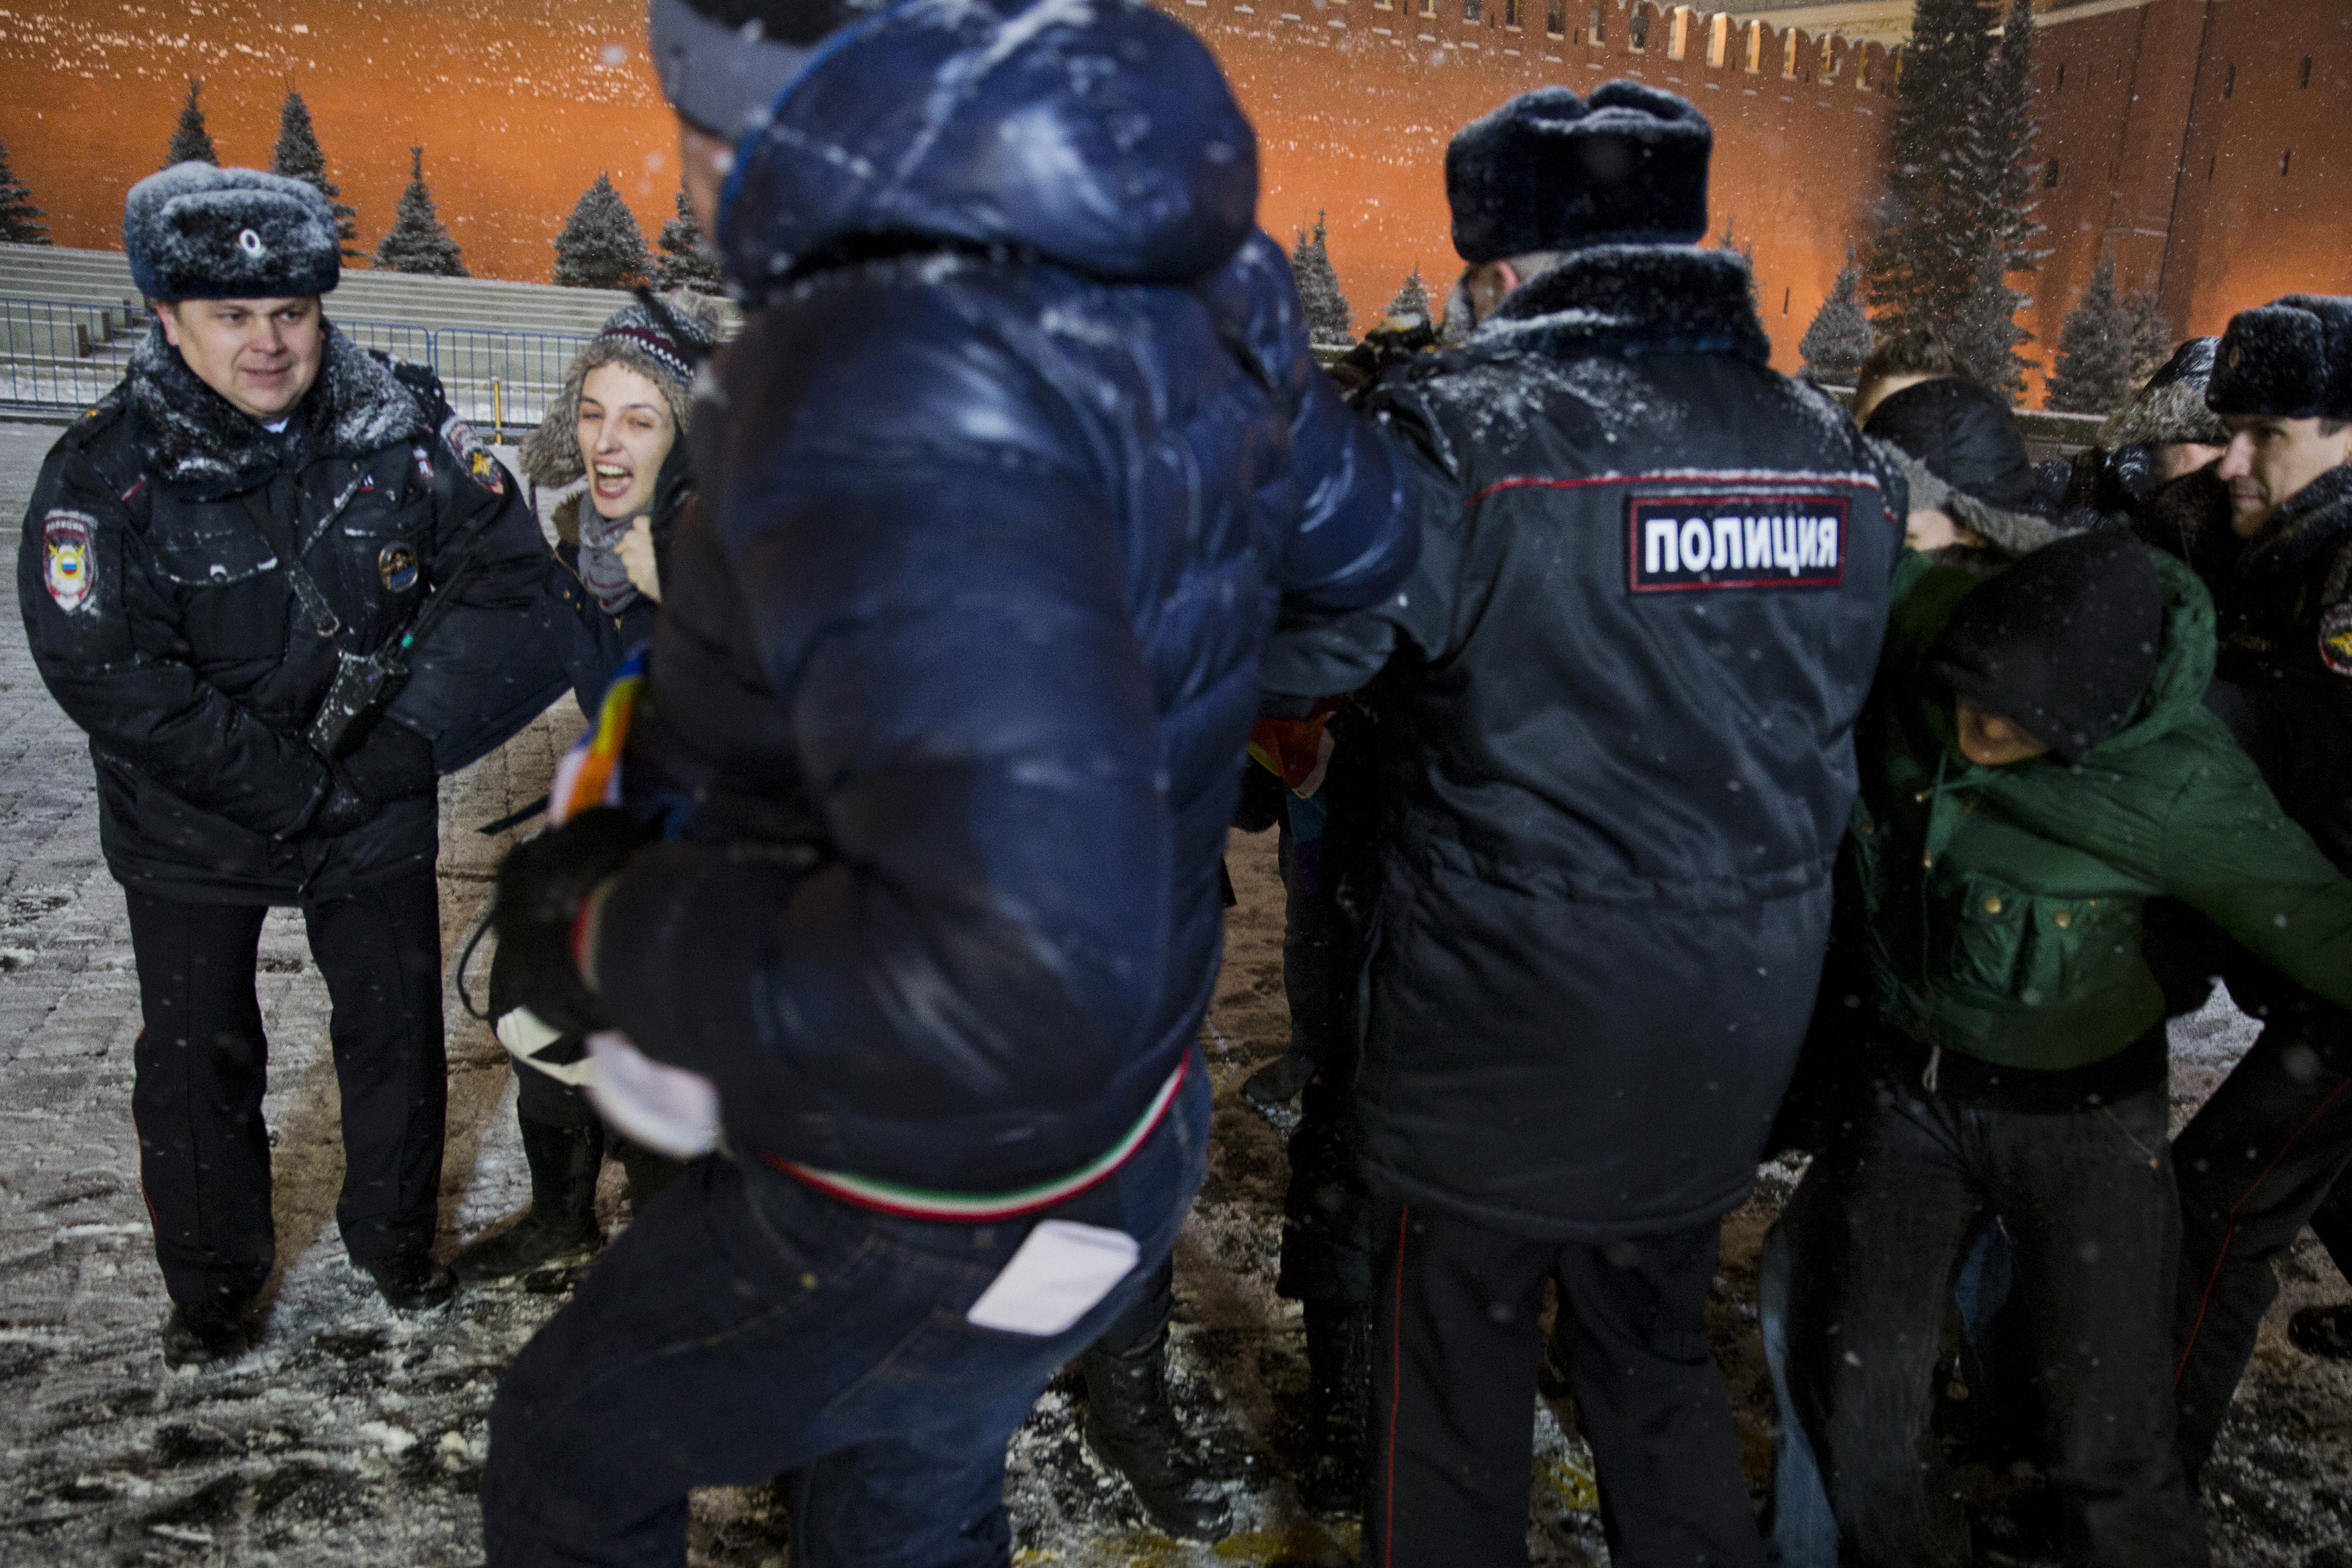 7 February 2014, Russia. Interior Ministry members detain LGBT rights activists attempting to hold a protest rally in Red Square near the Kremlin in Moscow shortly before Vladimir Putin opened the Sochi Winter Olympics. Media reported that 10 protesters were detained in Moscow and four in St. Petersburg.